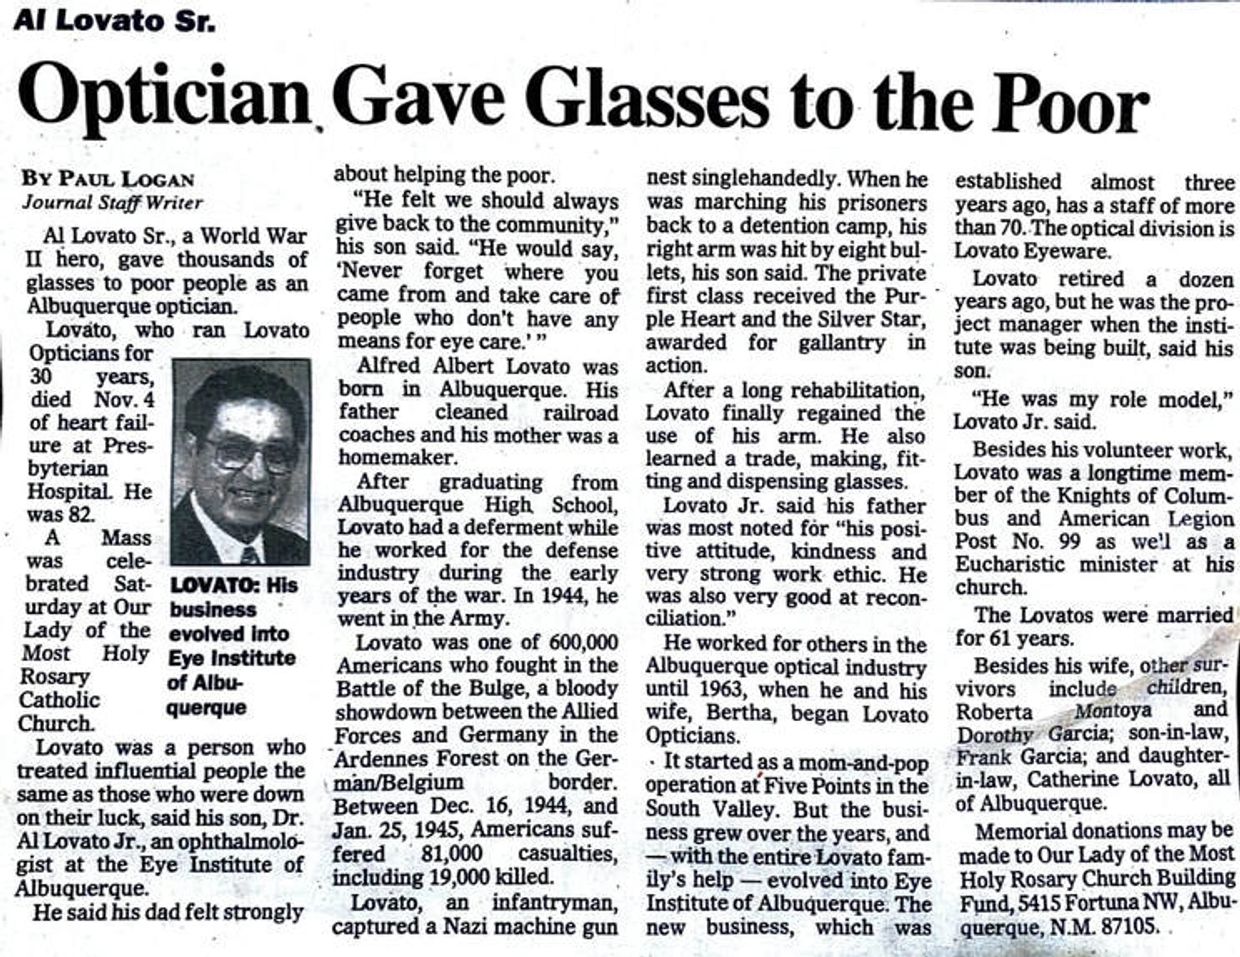 Alfred Lovato Sr. - Dr. Lovato's father's obituary detailing the inception of Lovato Eyecare